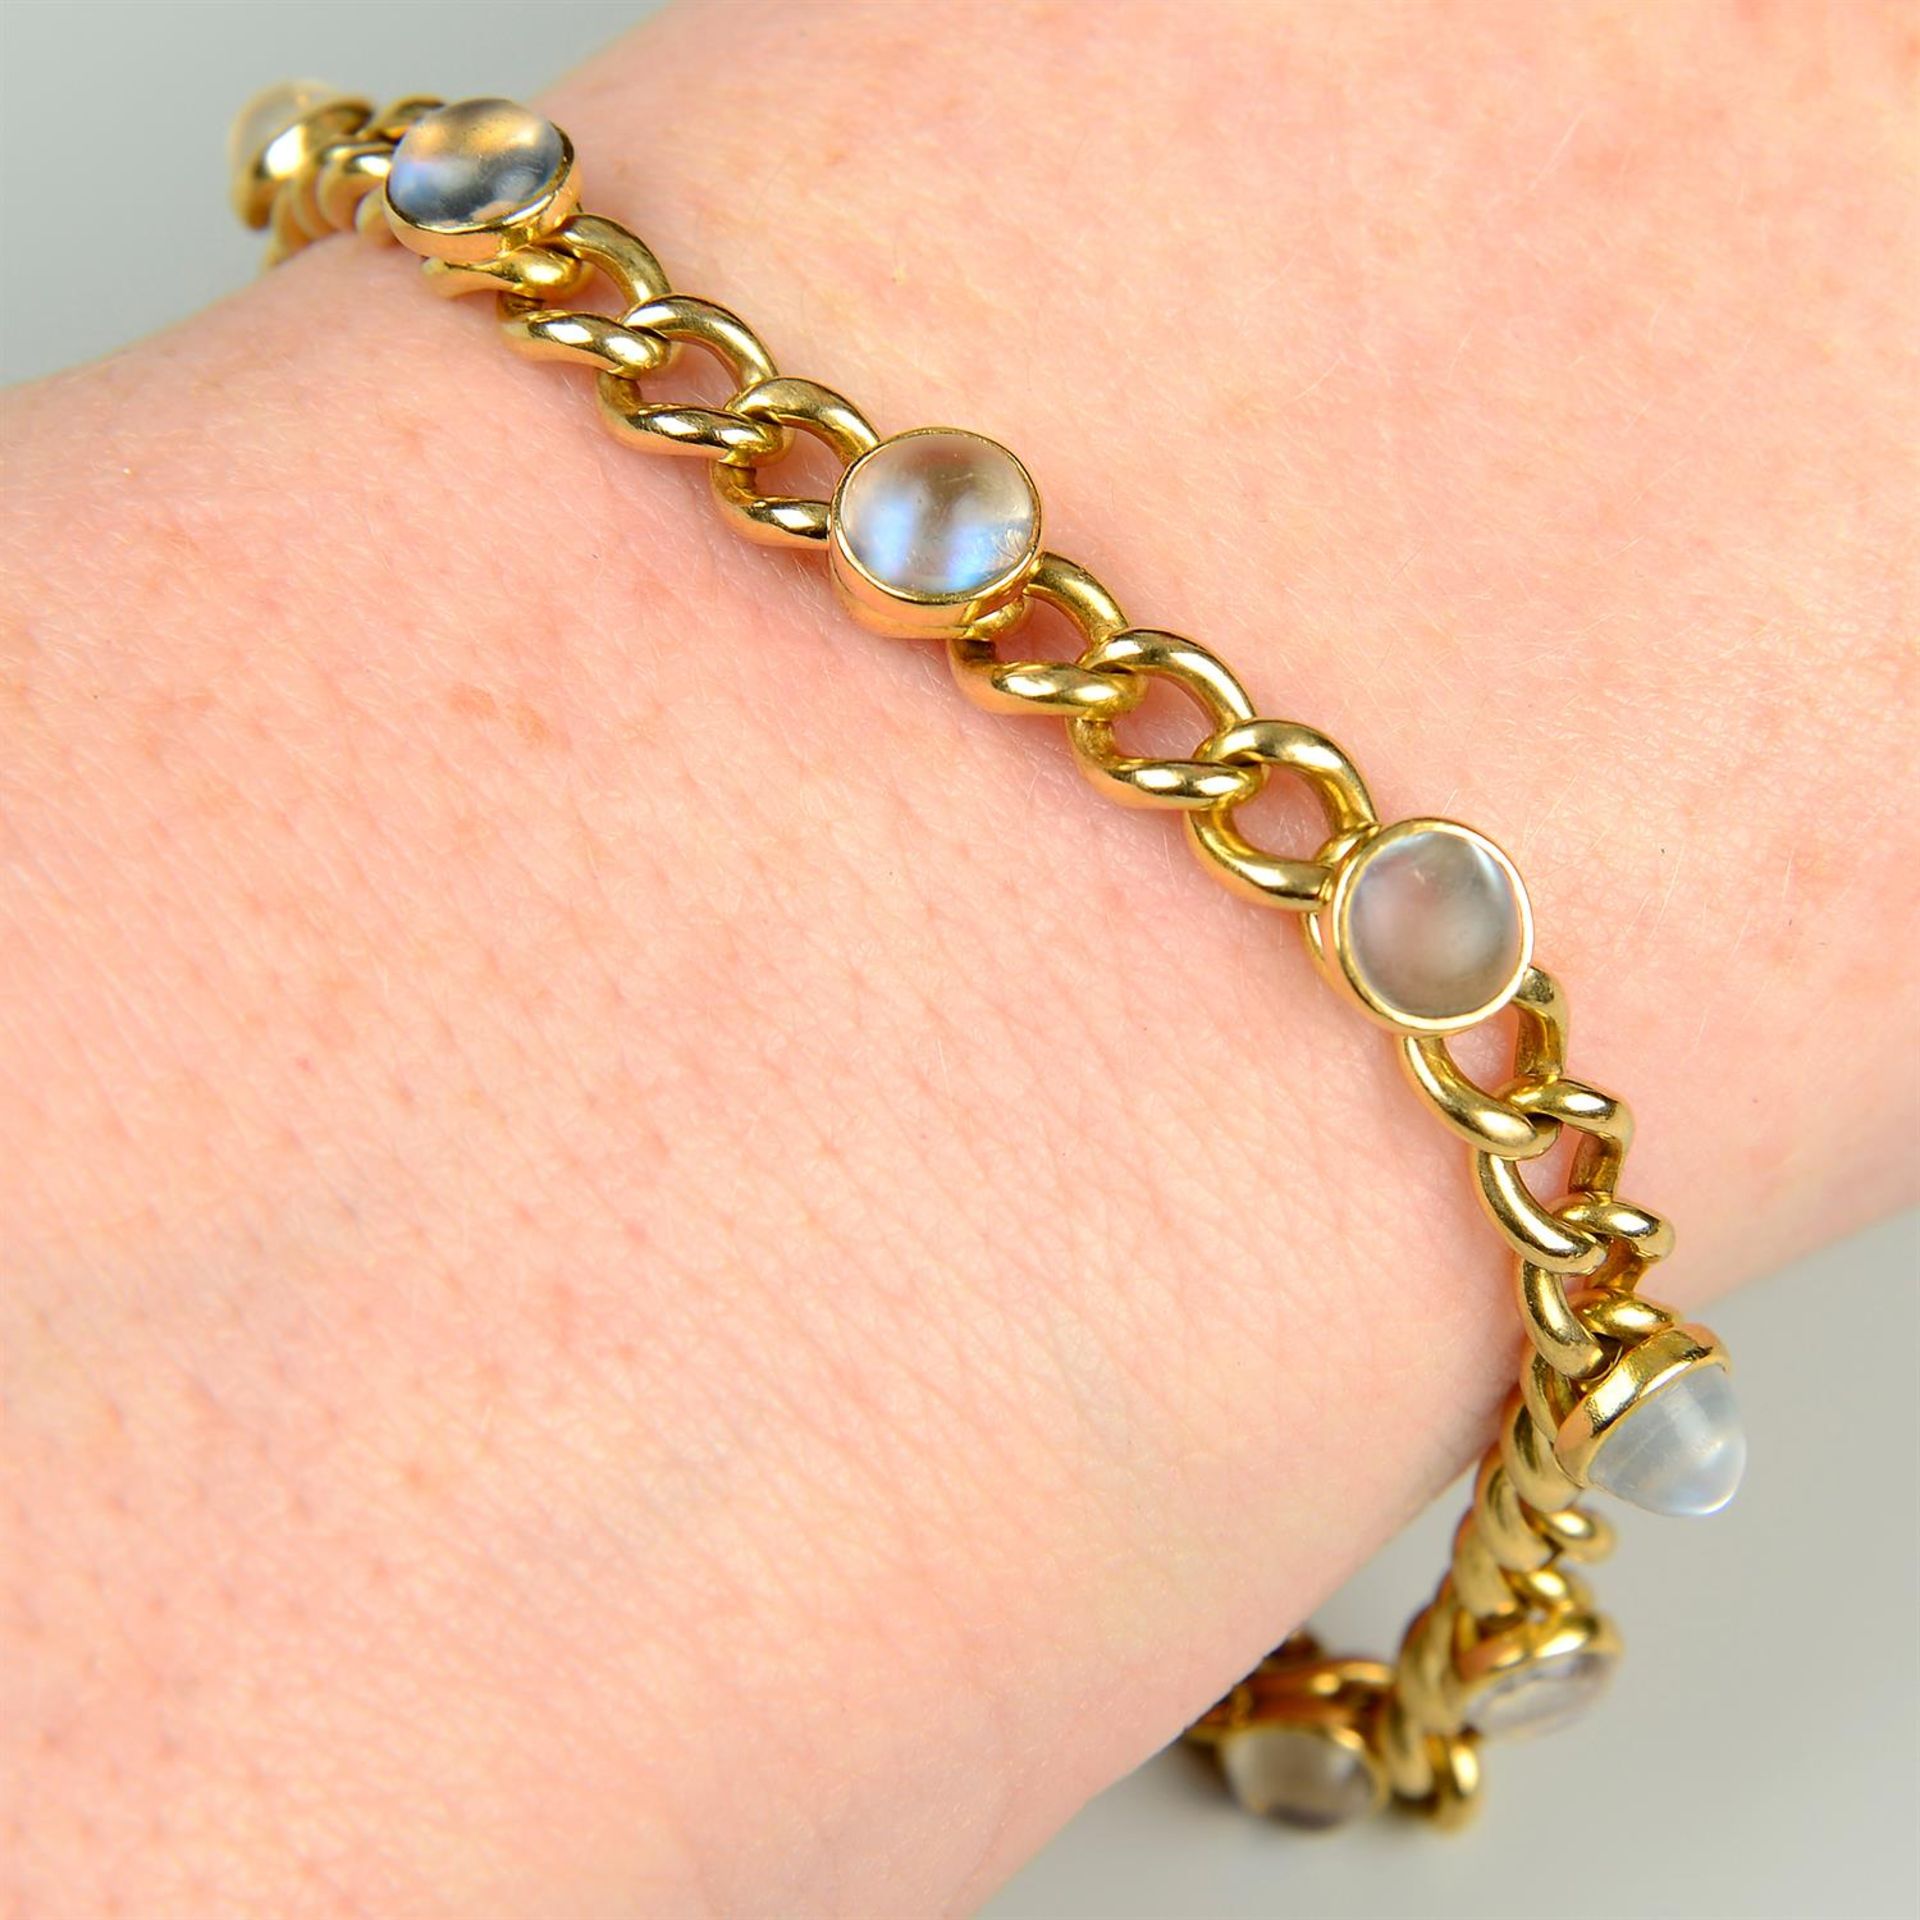 A late 19th century gold curb-link bracelet, with moonstone spacers.